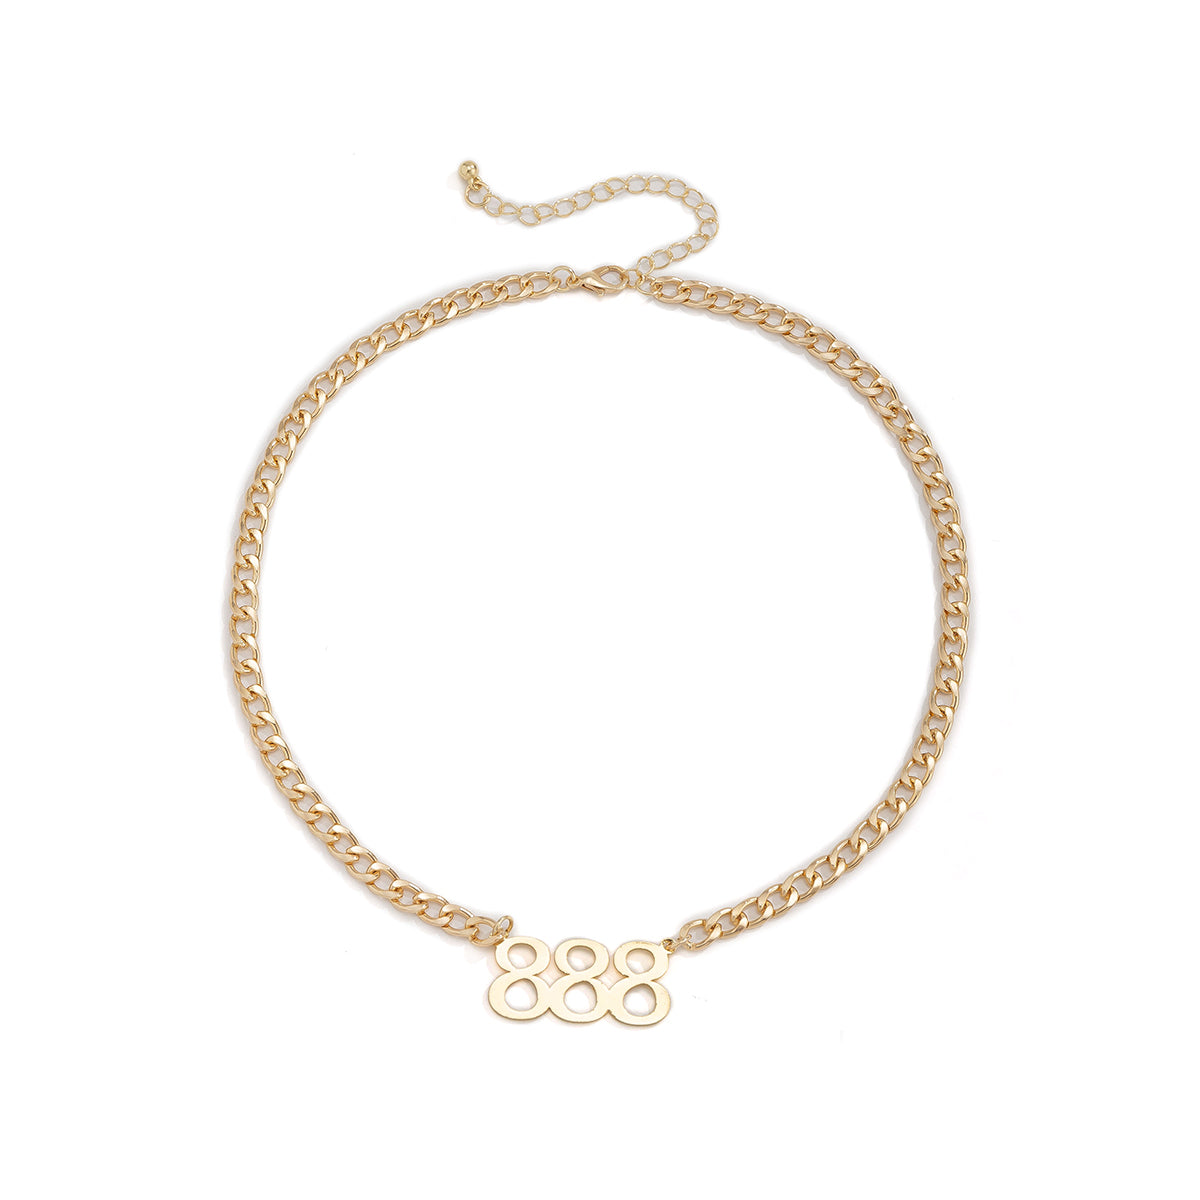 18K Gold-Plated '888' Curb Chain Pendant Necklace